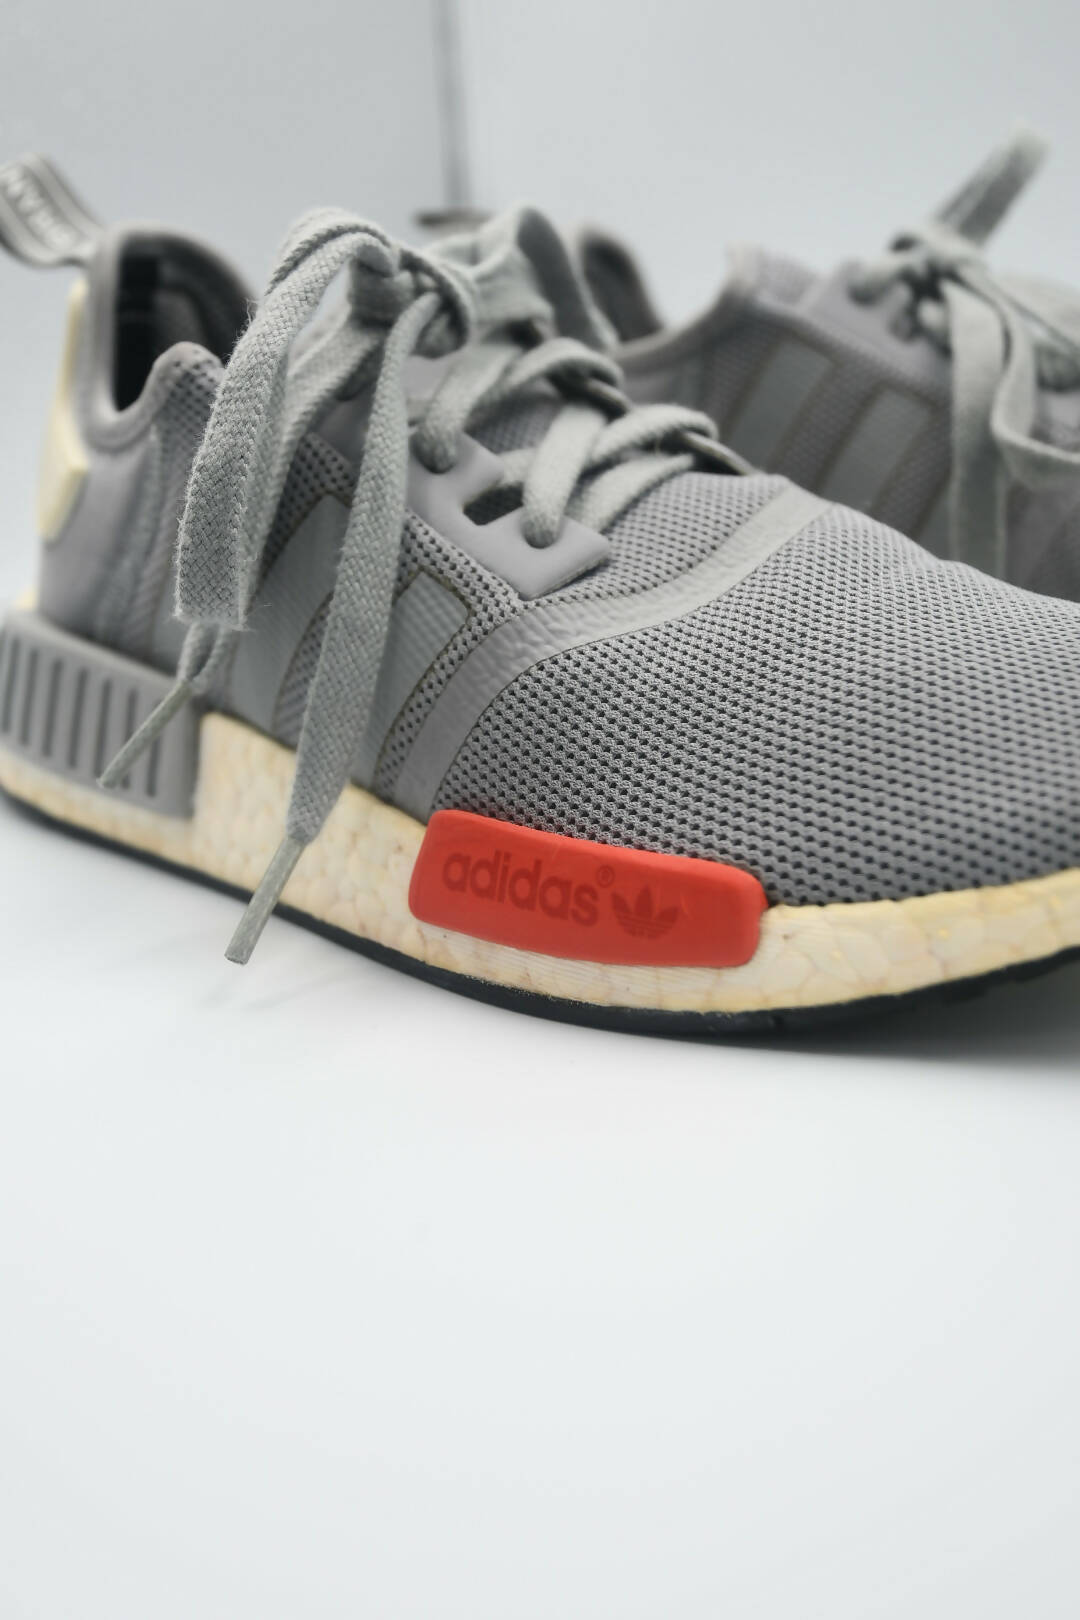 Image of Adidas Nmd R1 Moscow